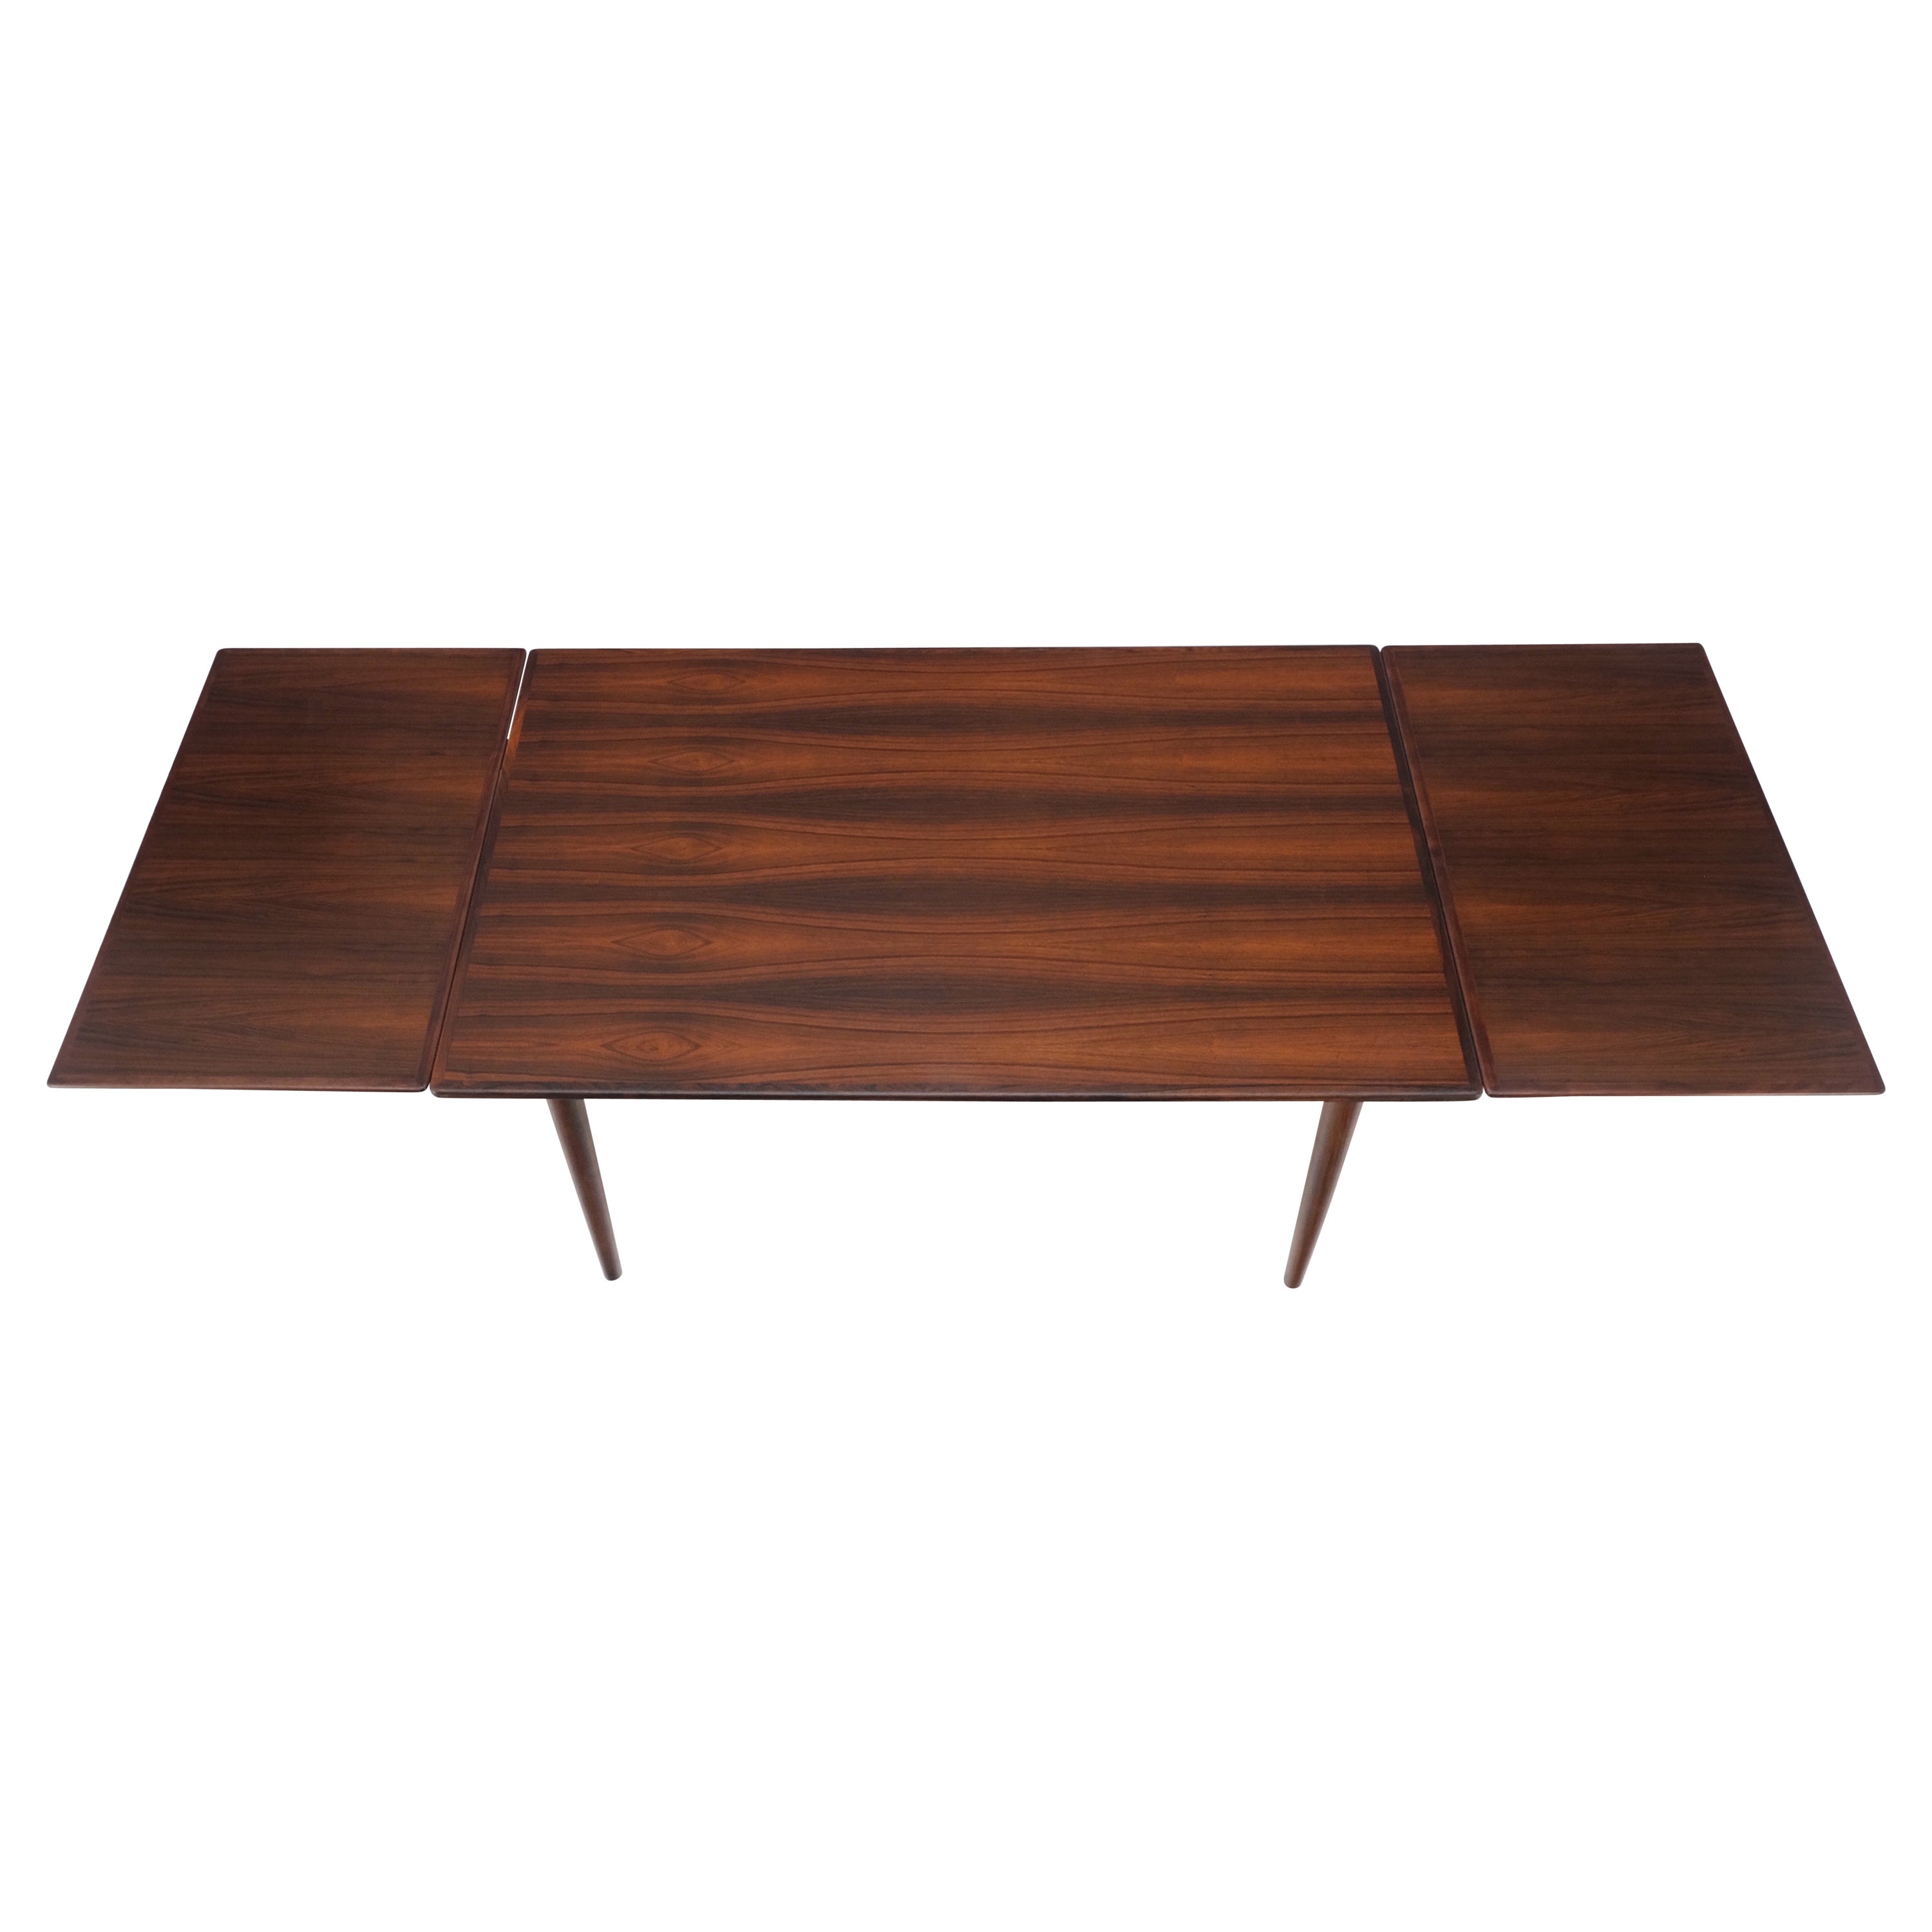 Large Danish Mid-Century Modern Rosewood Refectory Leaves Dining Table Mint!